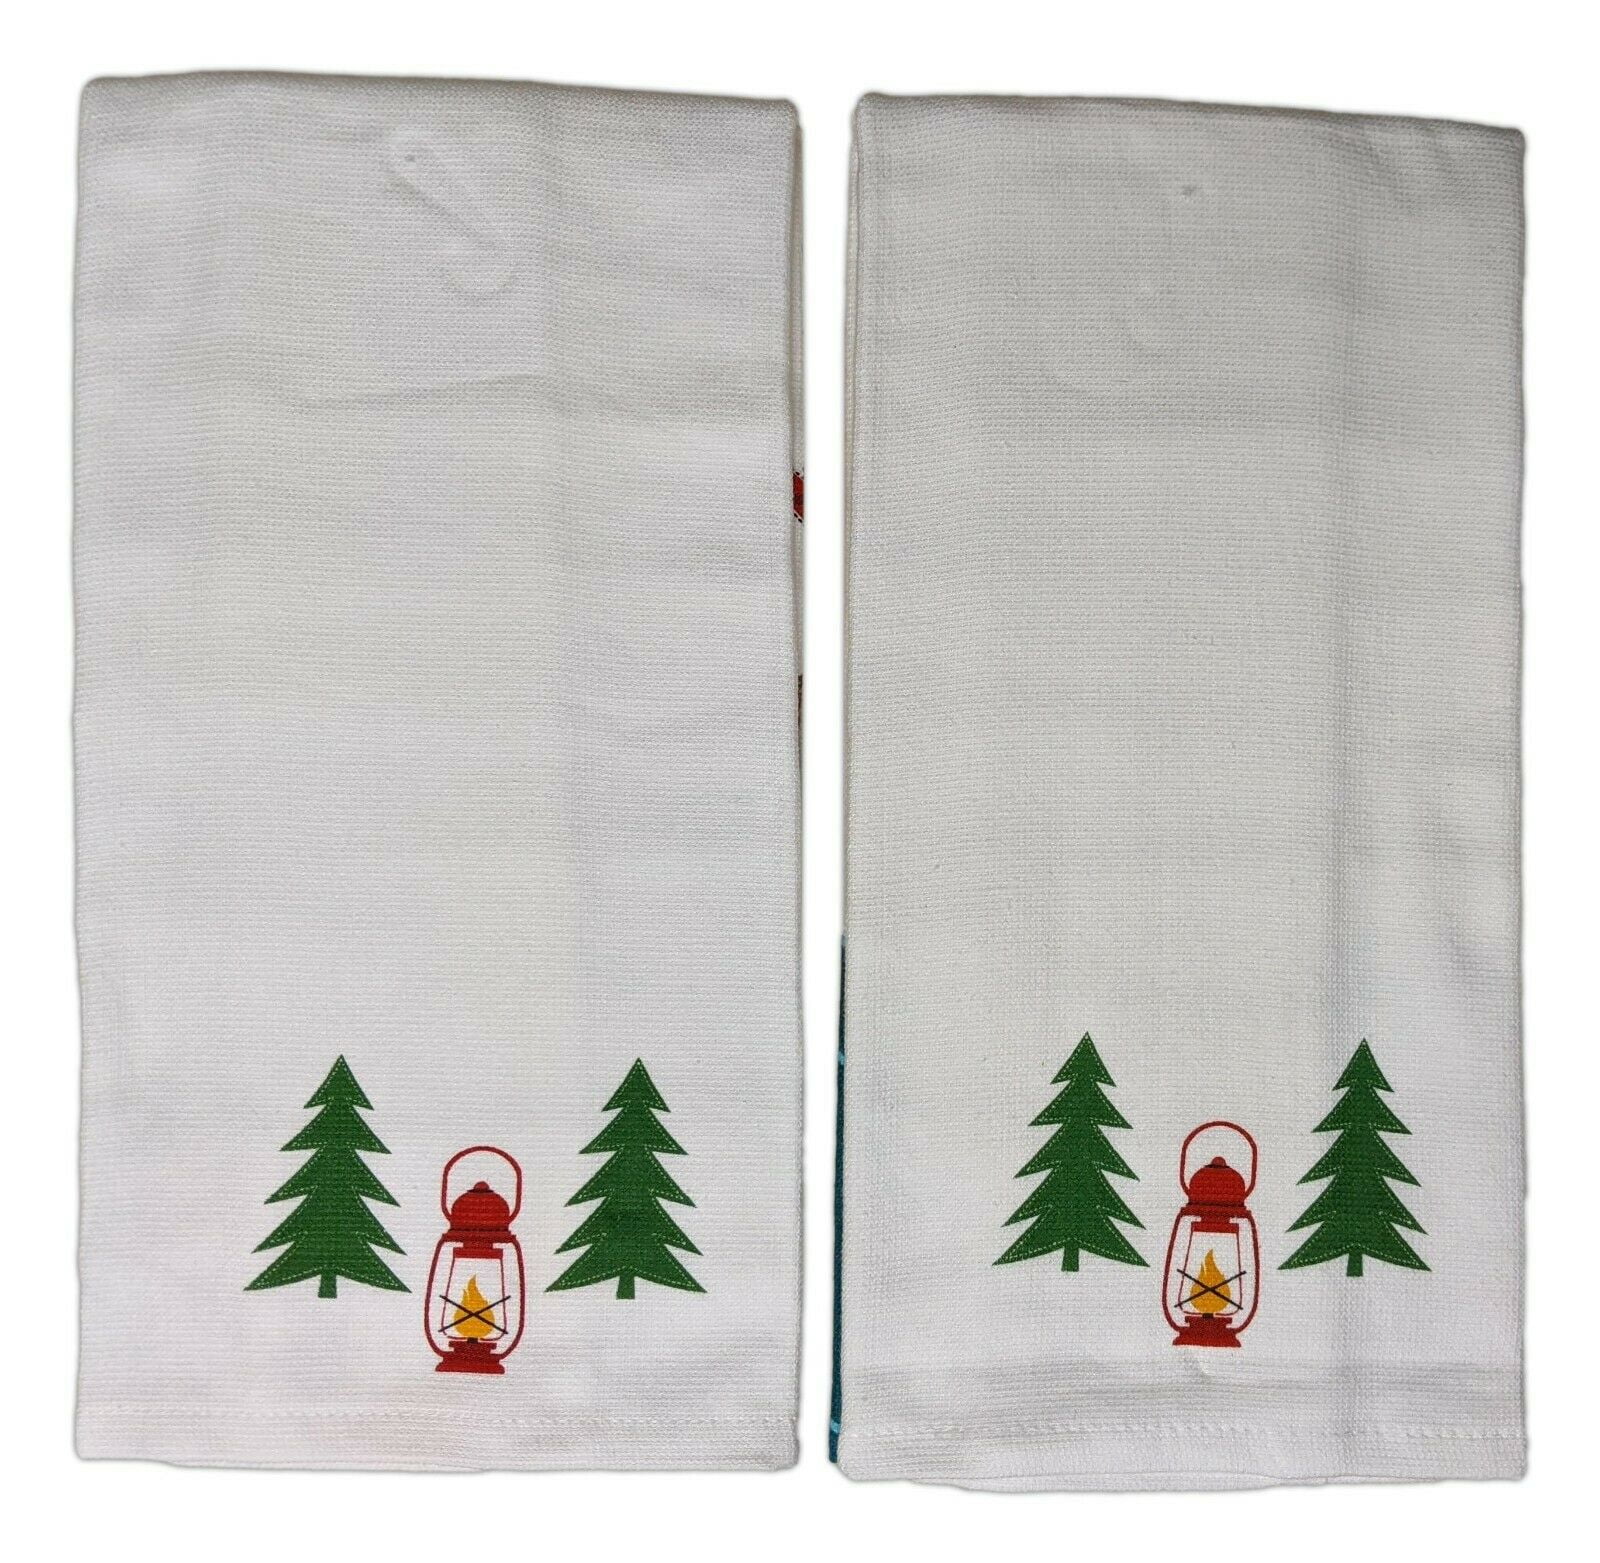 New! Woodland Forest Moose Dish Towels Terry Cotton Kitchen Dish Towels SET  of 2